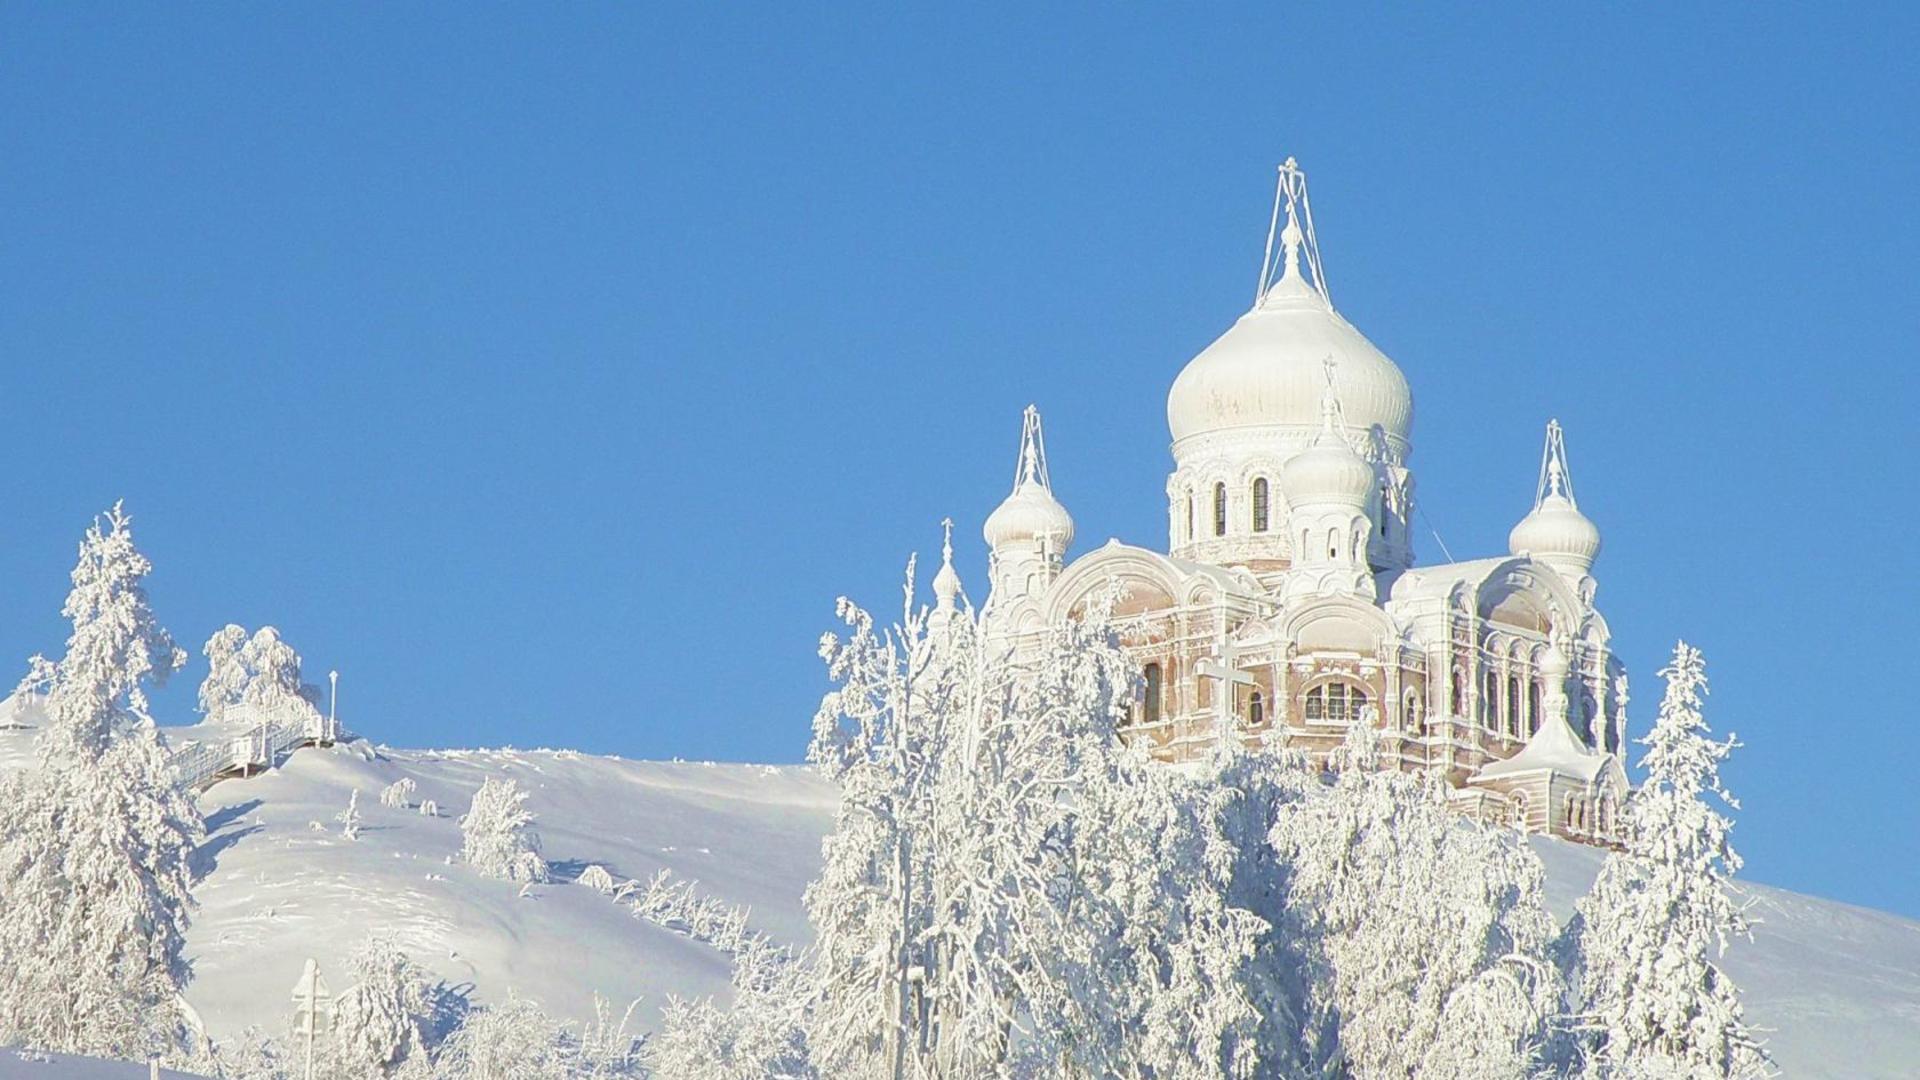 Orthodox Church Painted In Snow High Quality And